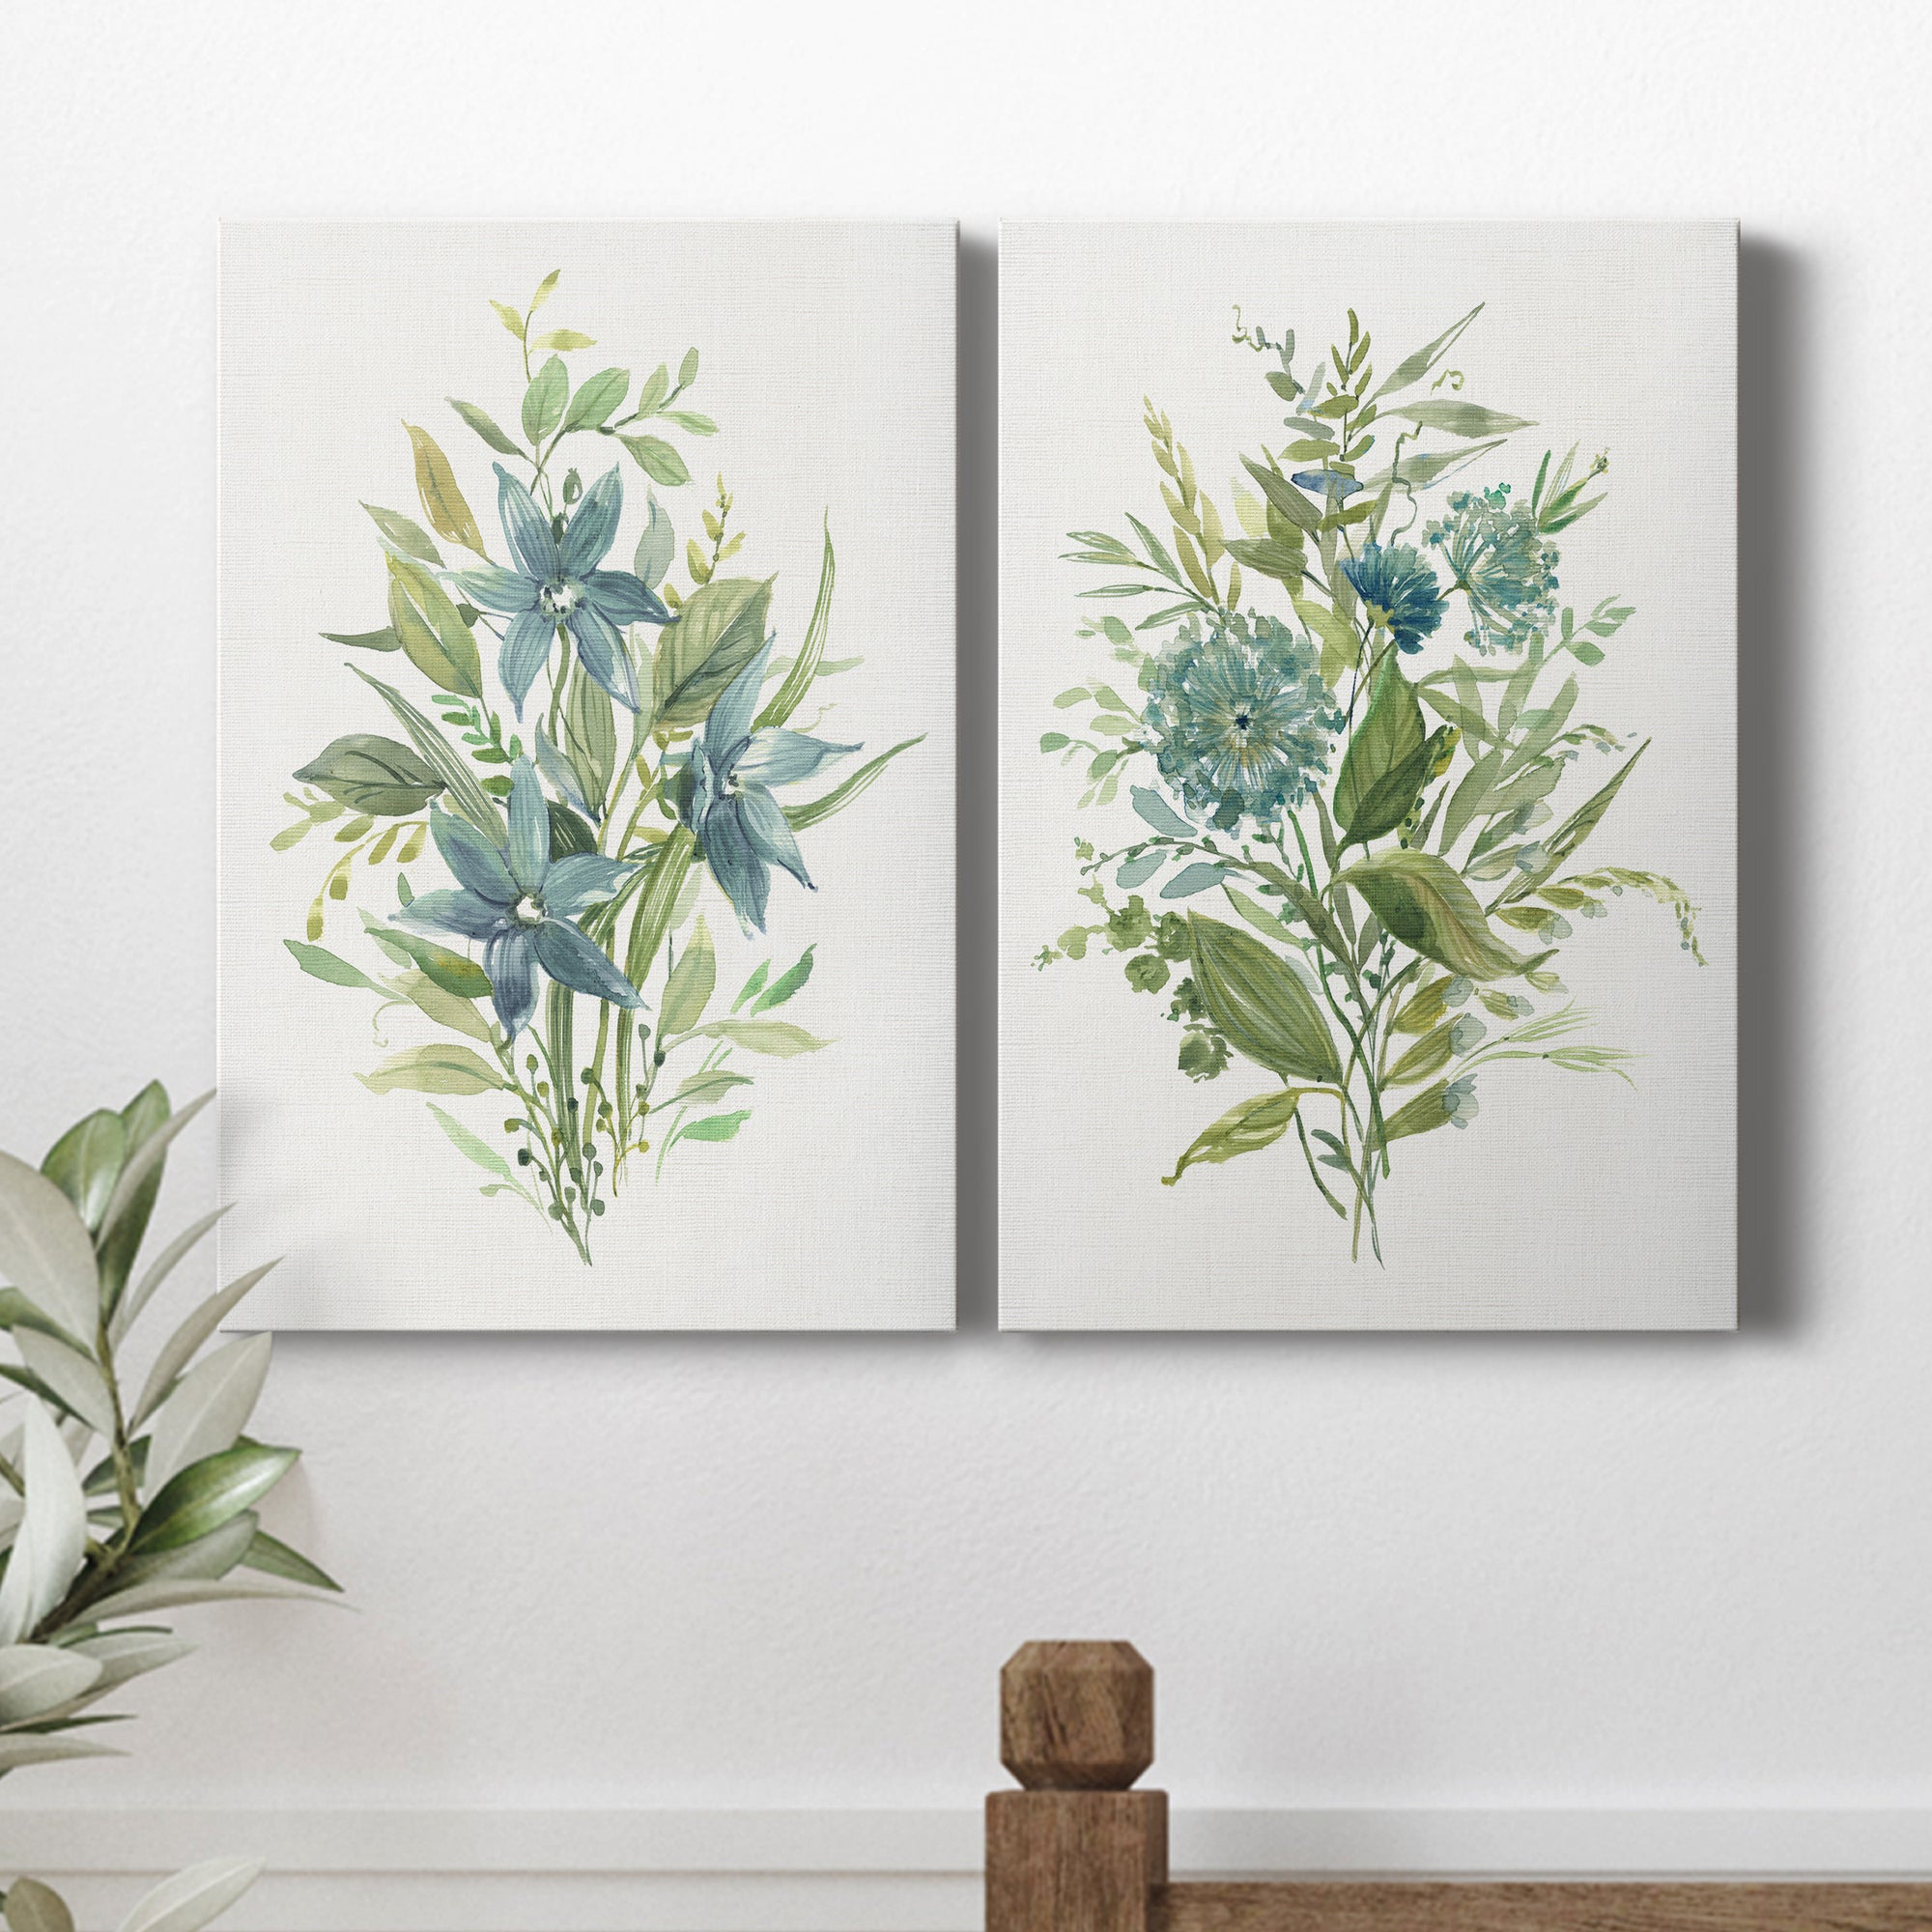 Greenery I Premium Gallery Wrapped Canvas - Ready to Hang - Set of 2 - 8 x 12 Each